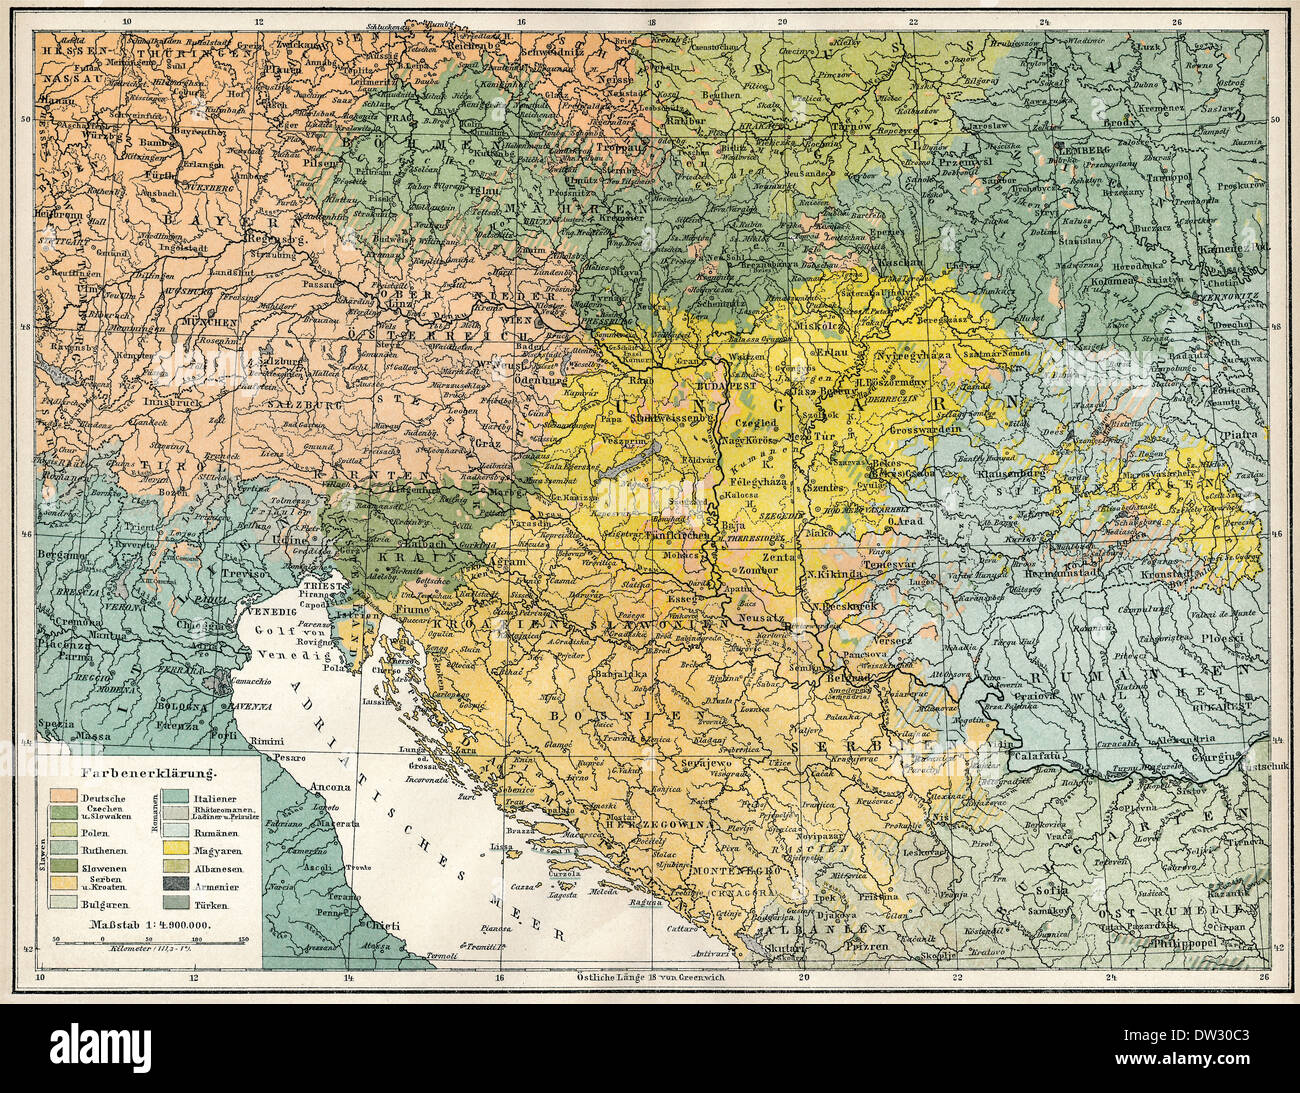 Historical, ethnological map of Austria-Hungary, Dual Monarchy or kuk monarchy, for the period between 1867 and 1918, ethnic groups such as Germans, S Stock Photo